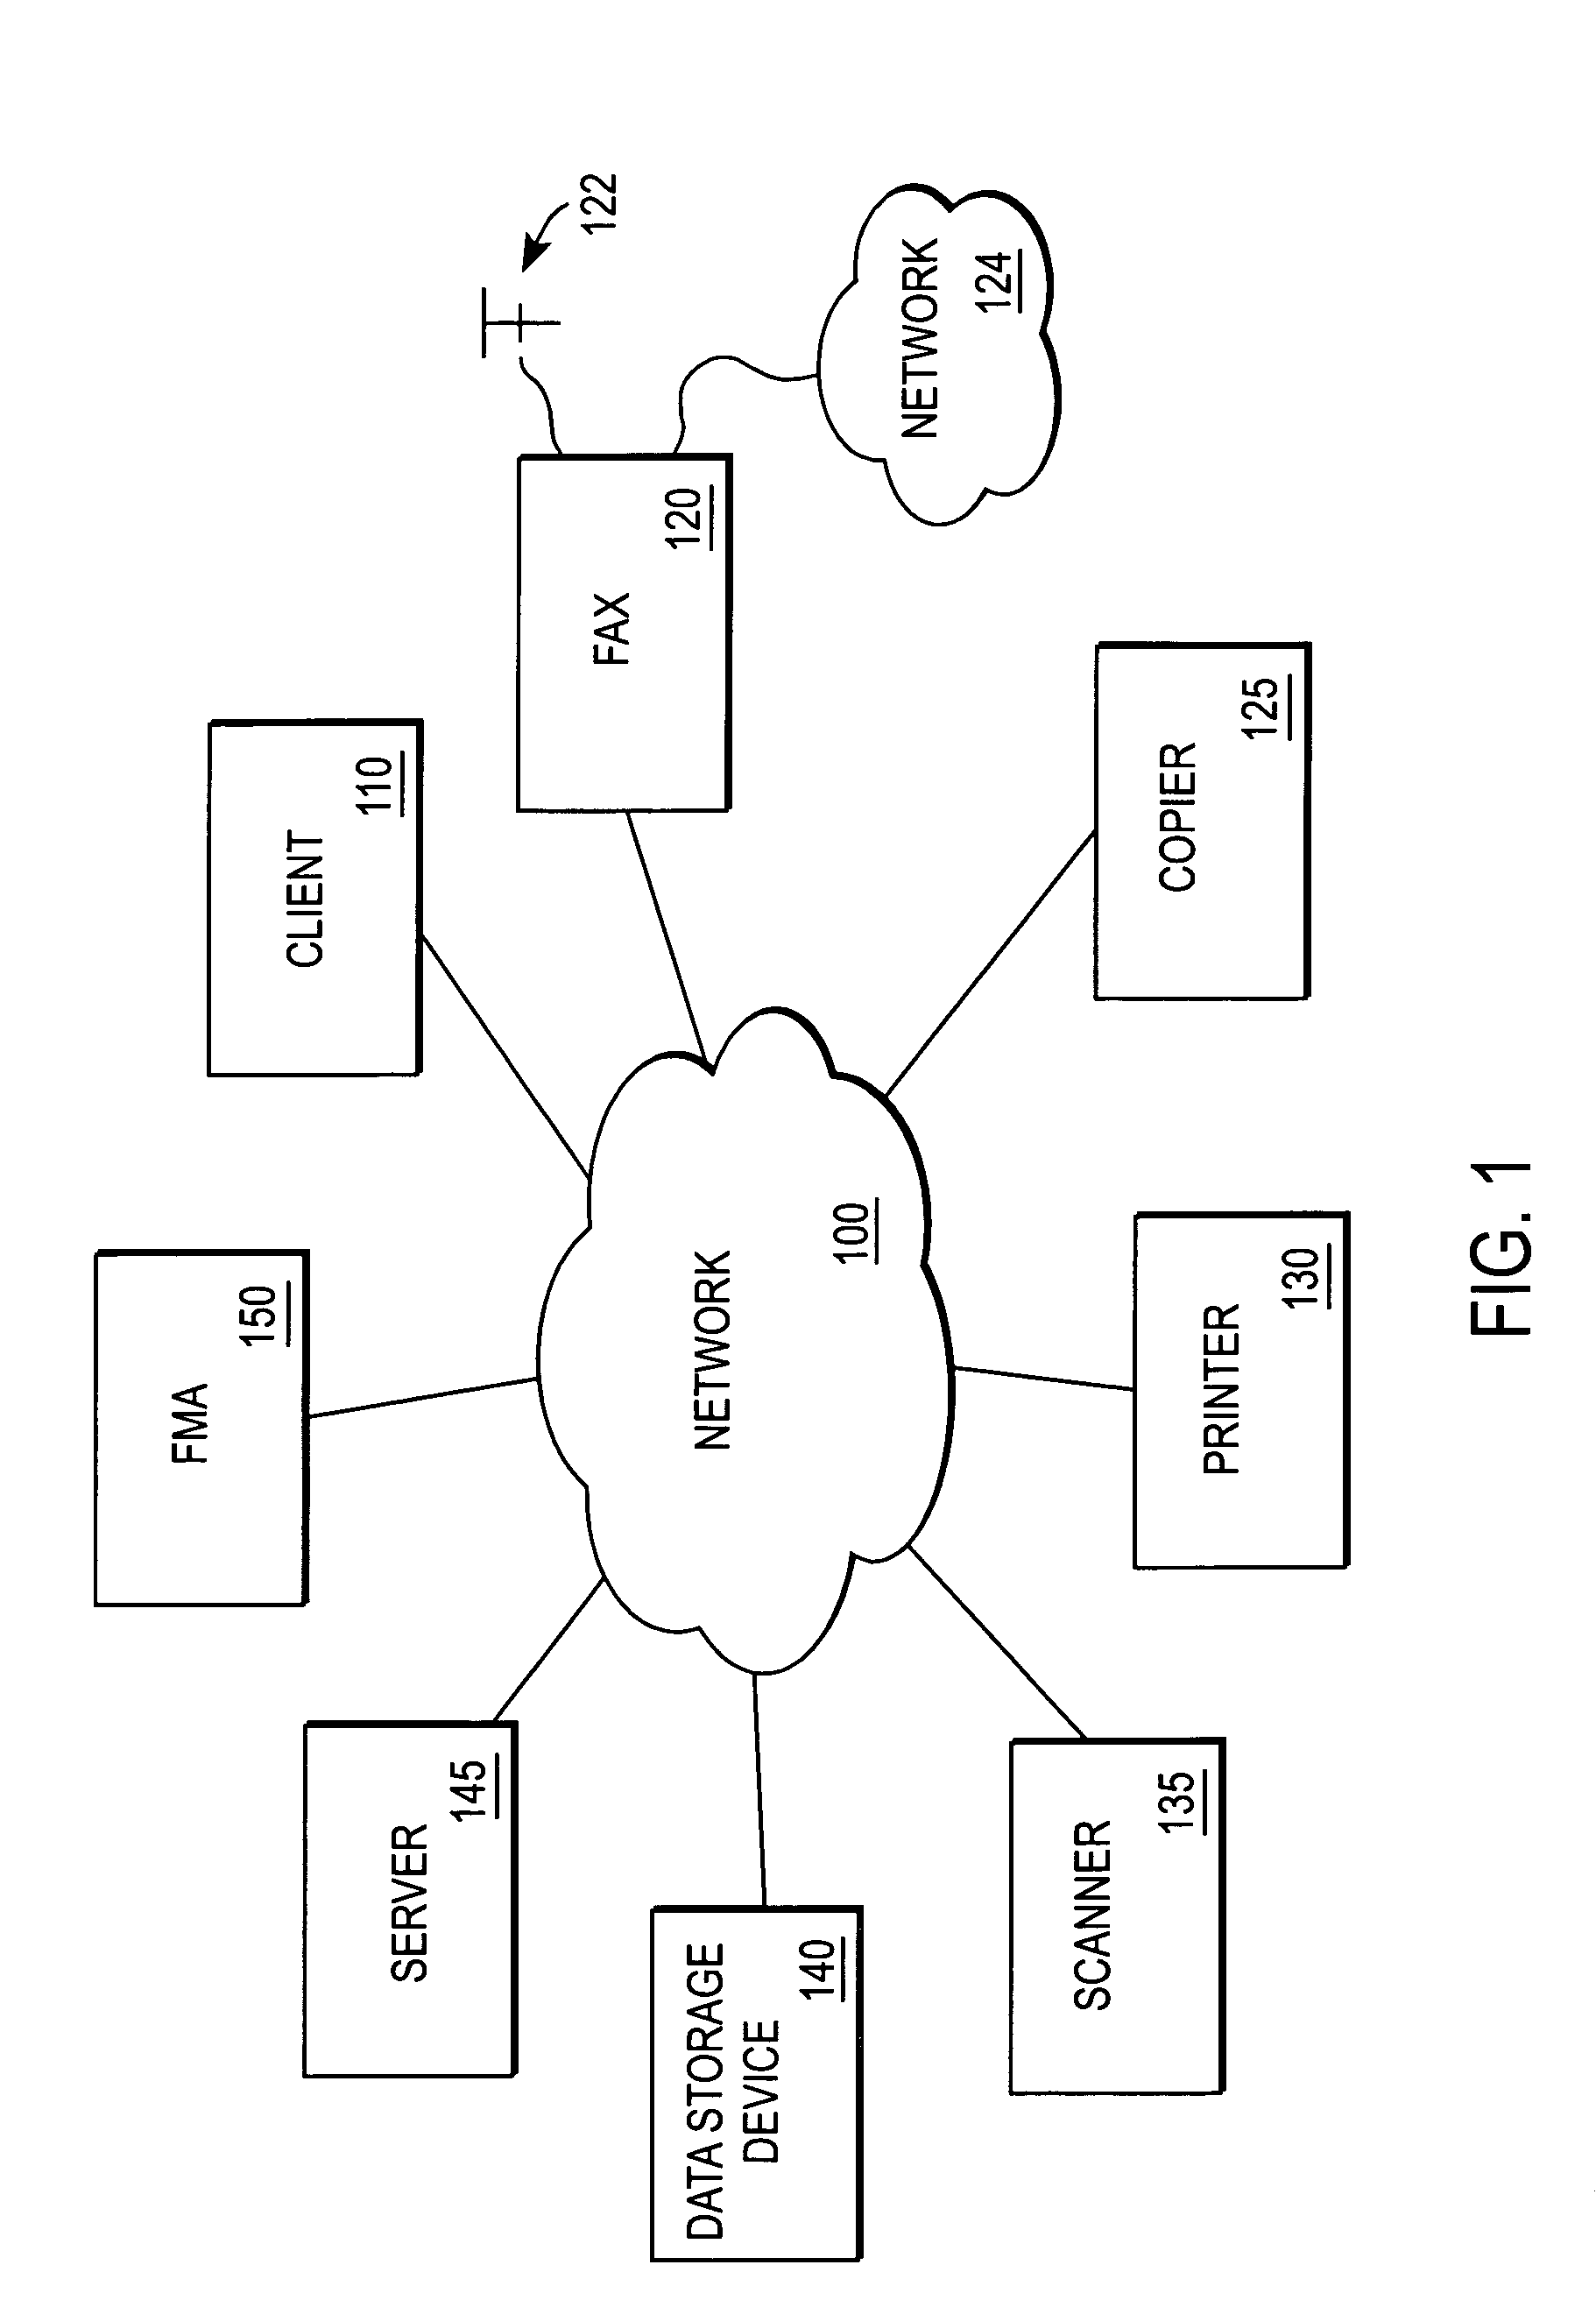 System for capturing facsimile data in an electronic document management system